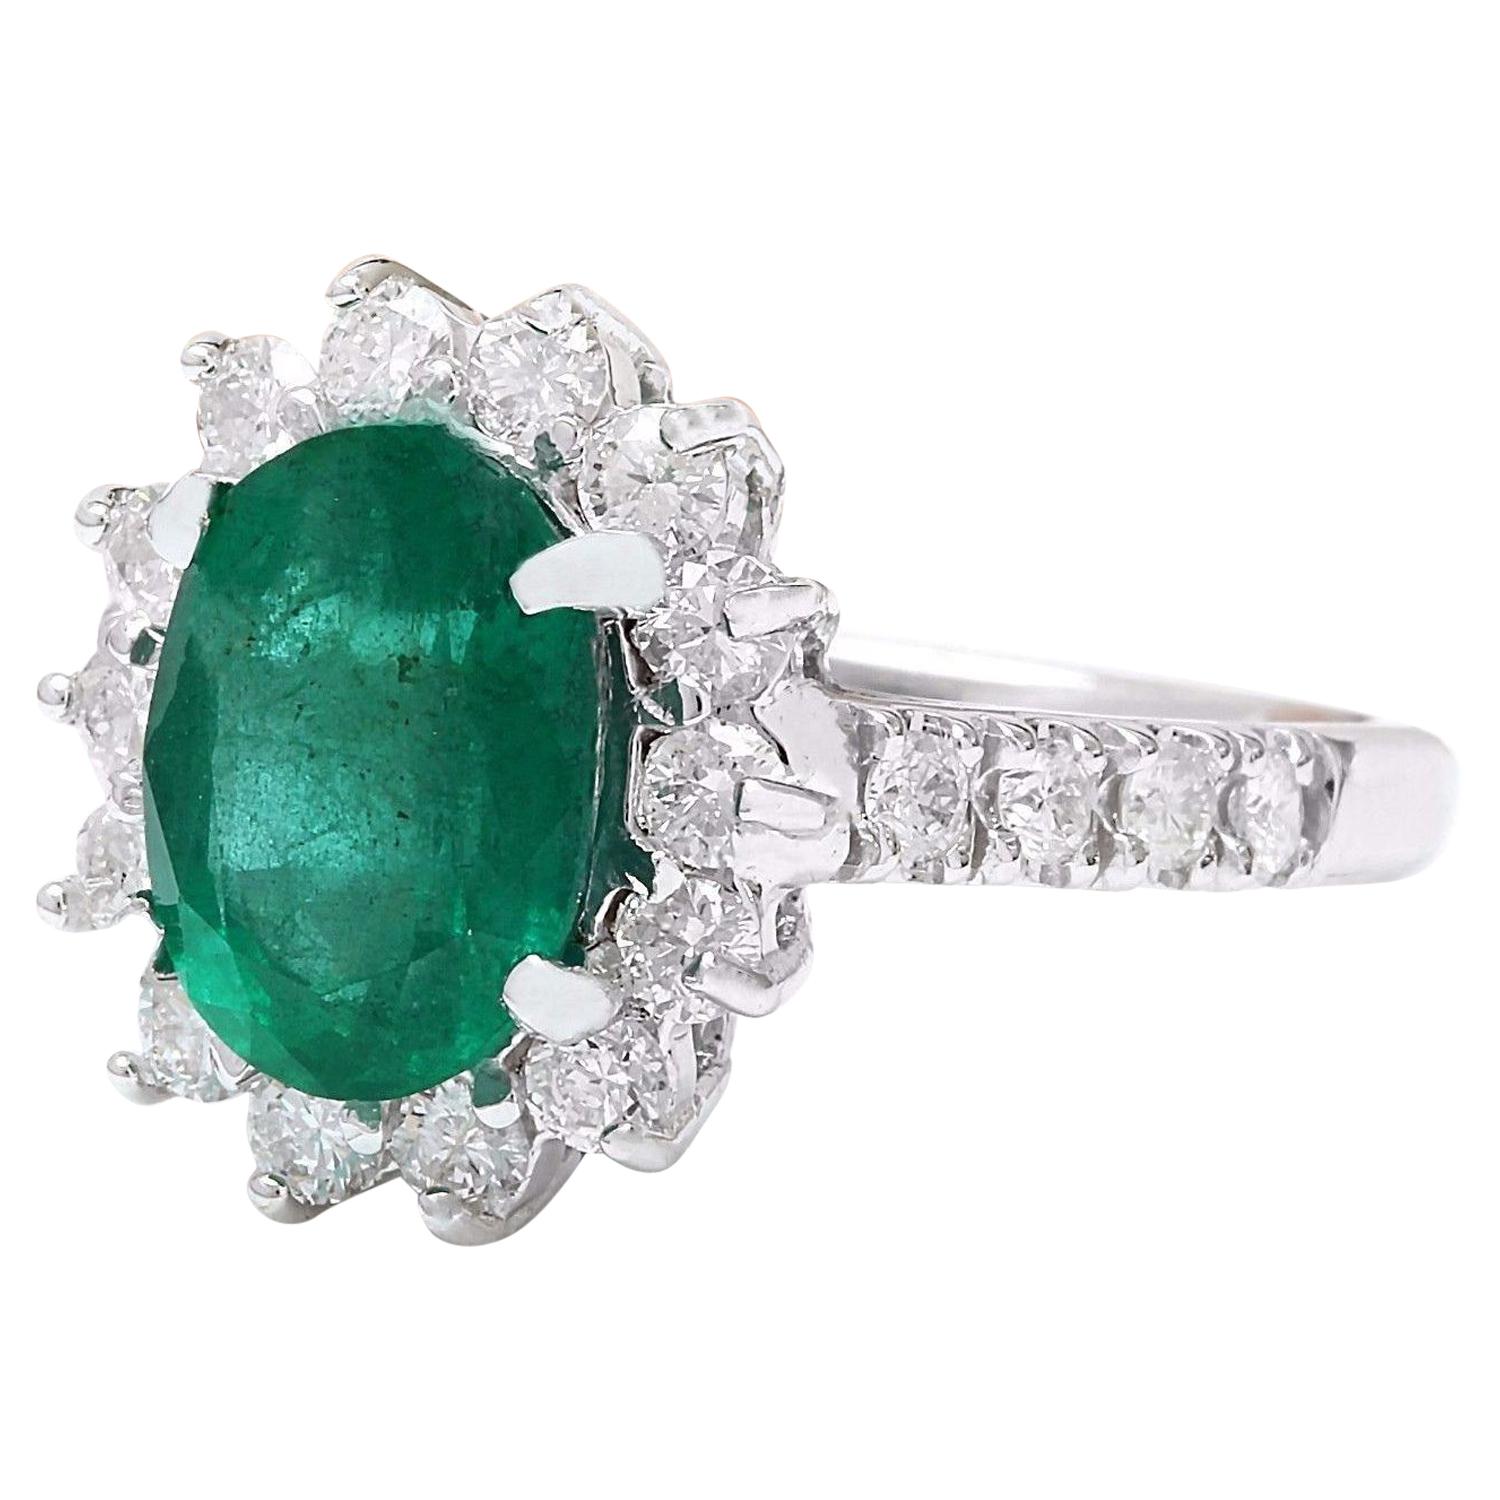 3.70 Carat Natural Emerald 14K Solid White Gold Diamond Ring
 Item Type: Ring
 Item Style: Engagement
 Material: 14K White Gold
 Mainstone: Emerald
 Stone Color: Green
 Stone Weight: 2.80 Carat
 Stone Shape: Oval
 Stone Quantity: 1
 Stone